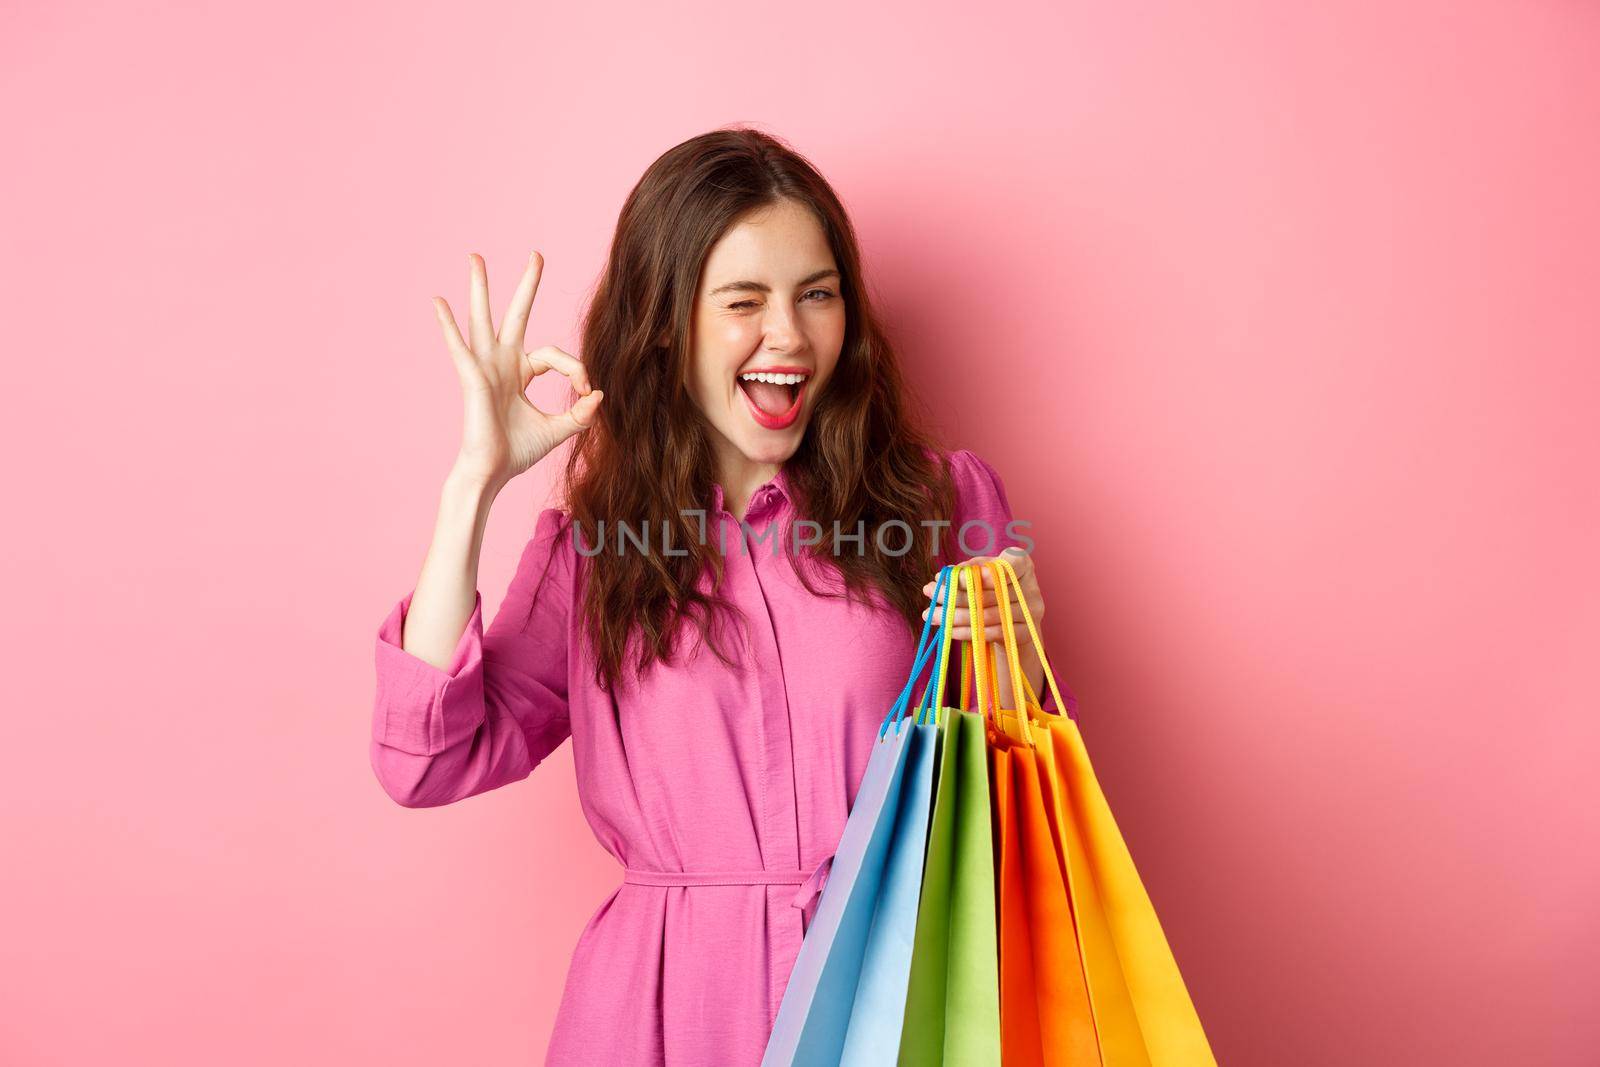 Young happy woman shopper showing okay sign, winking pleased with good discounts, buying staff on sale, holding shopping bags and smiling pleased, pink background.